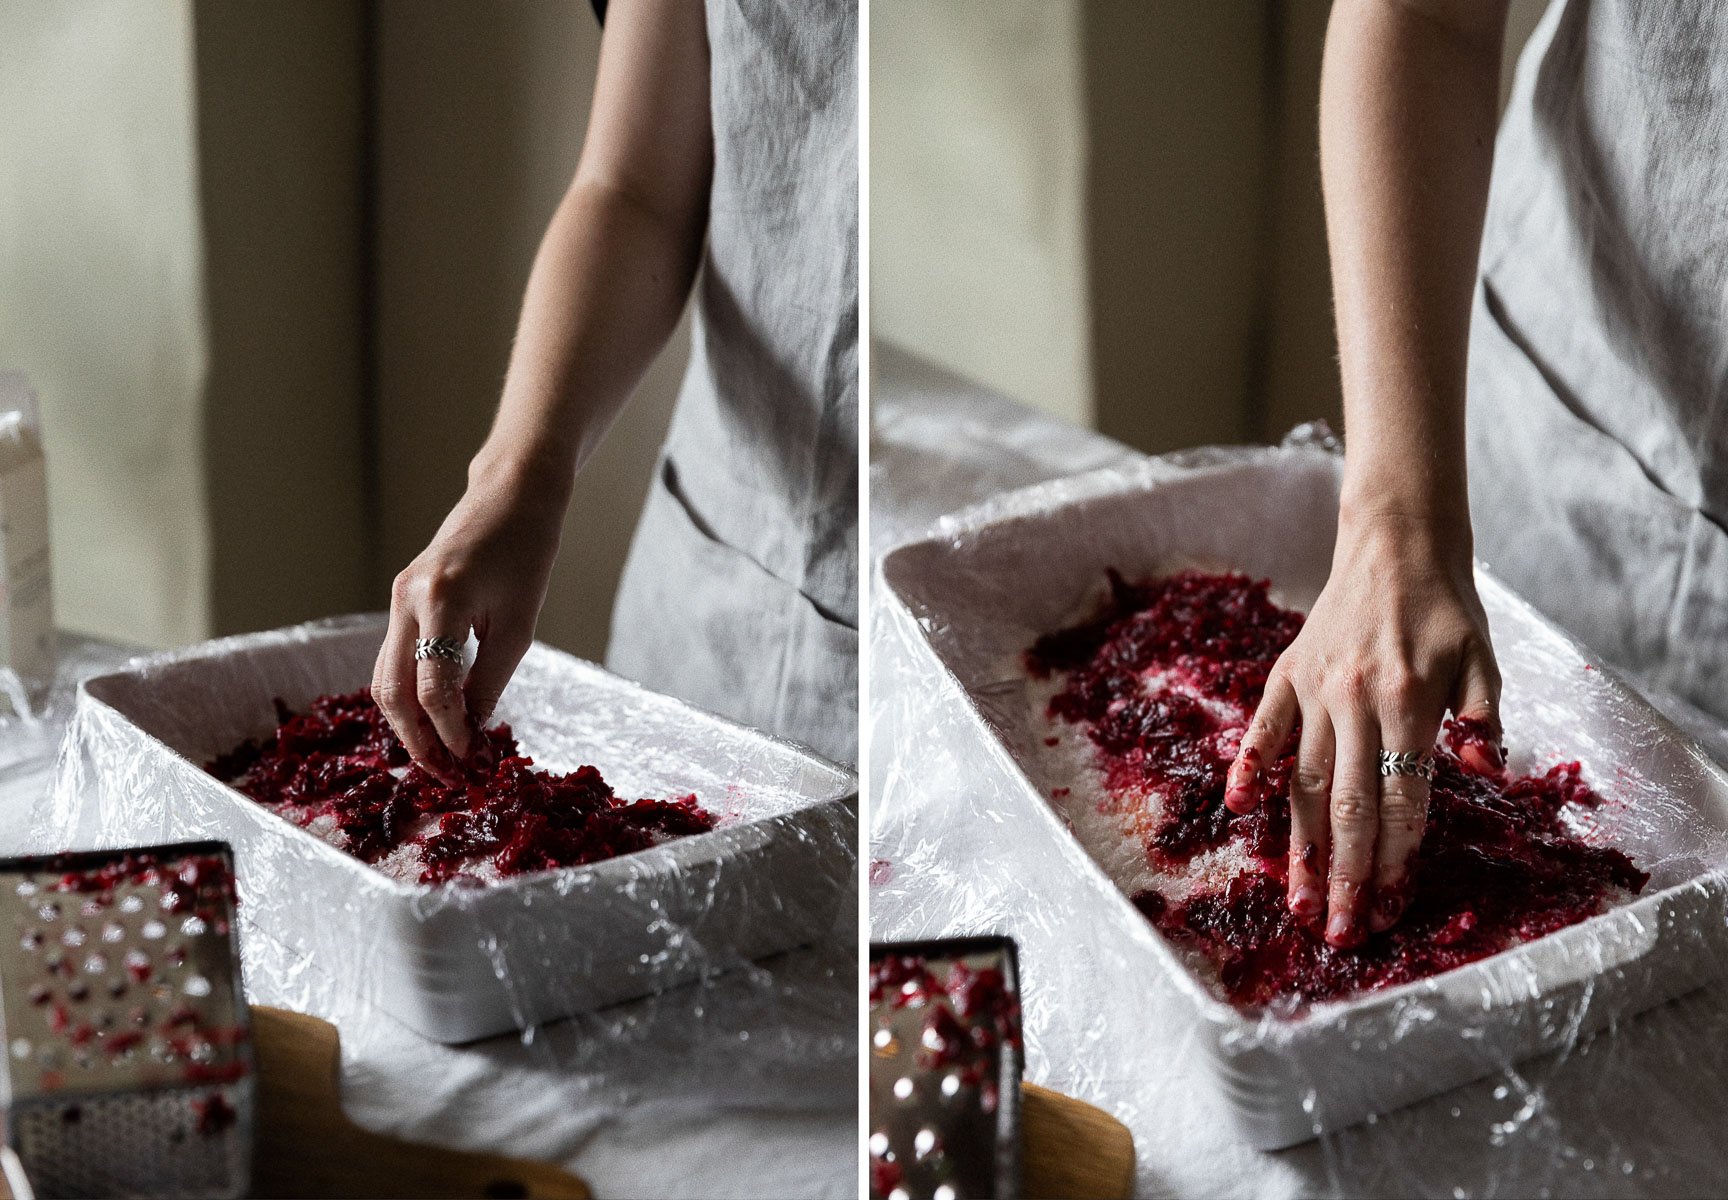 Thackerys Cookery School Lewes - Hikaru Funnell Photography - Beetroot Cured Salmon Recipe - 2021 - 8.jpg